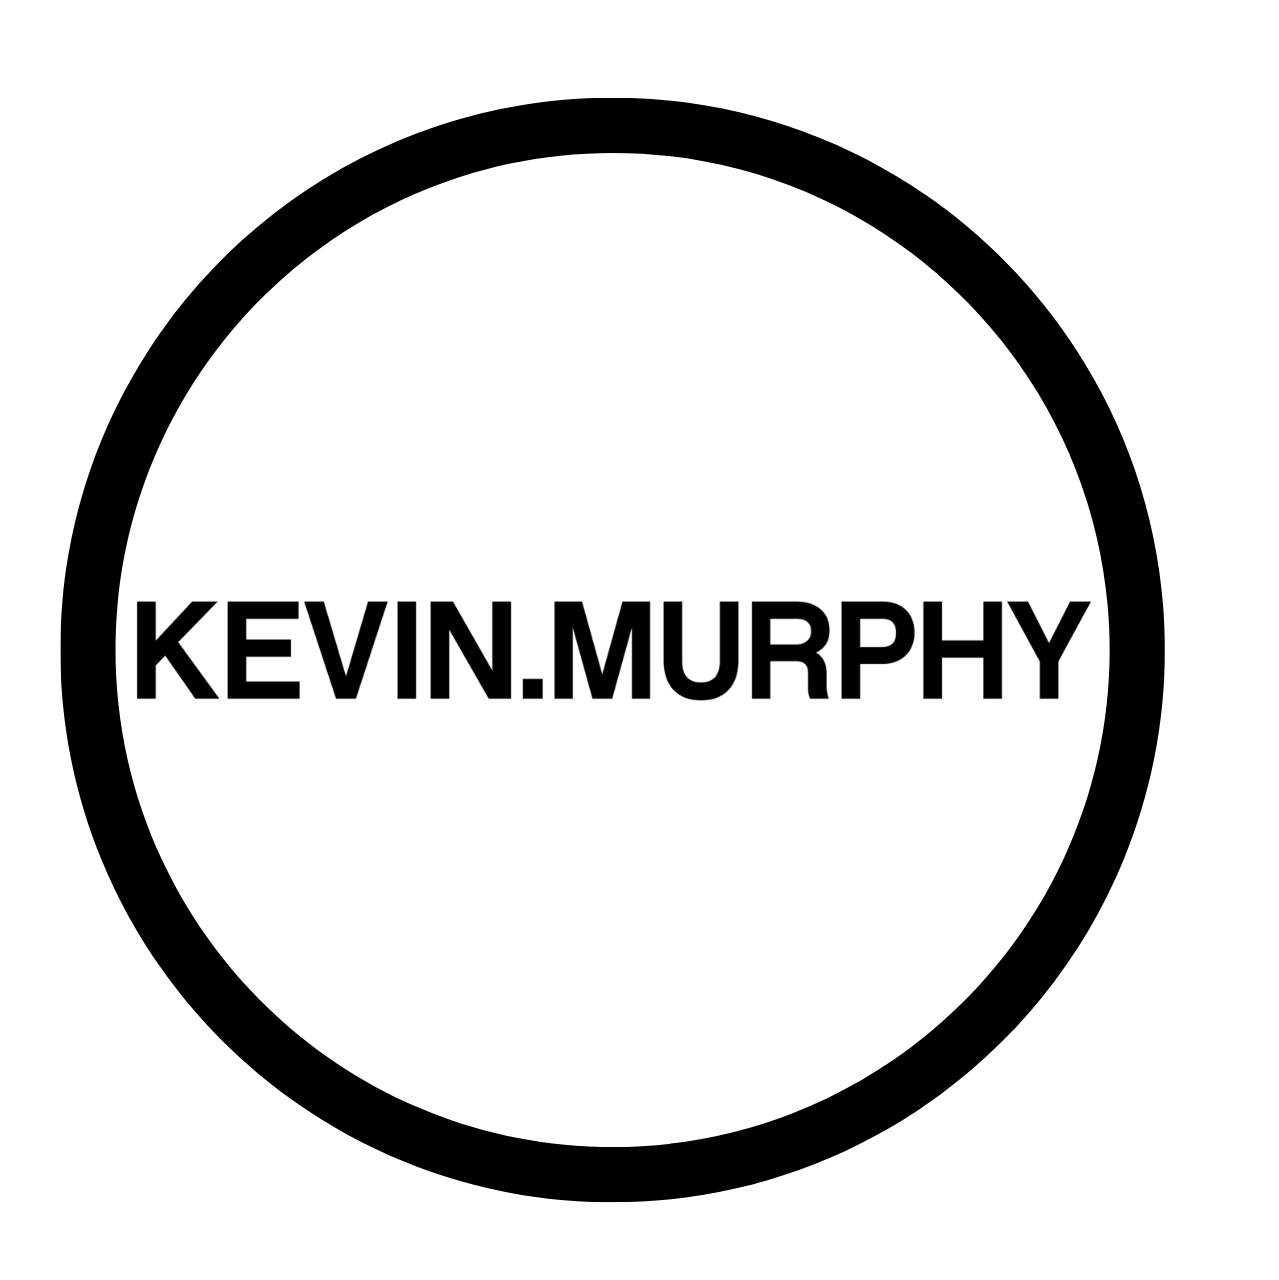 Elysium Hair Brisbane is a partner with Kevin Murphy